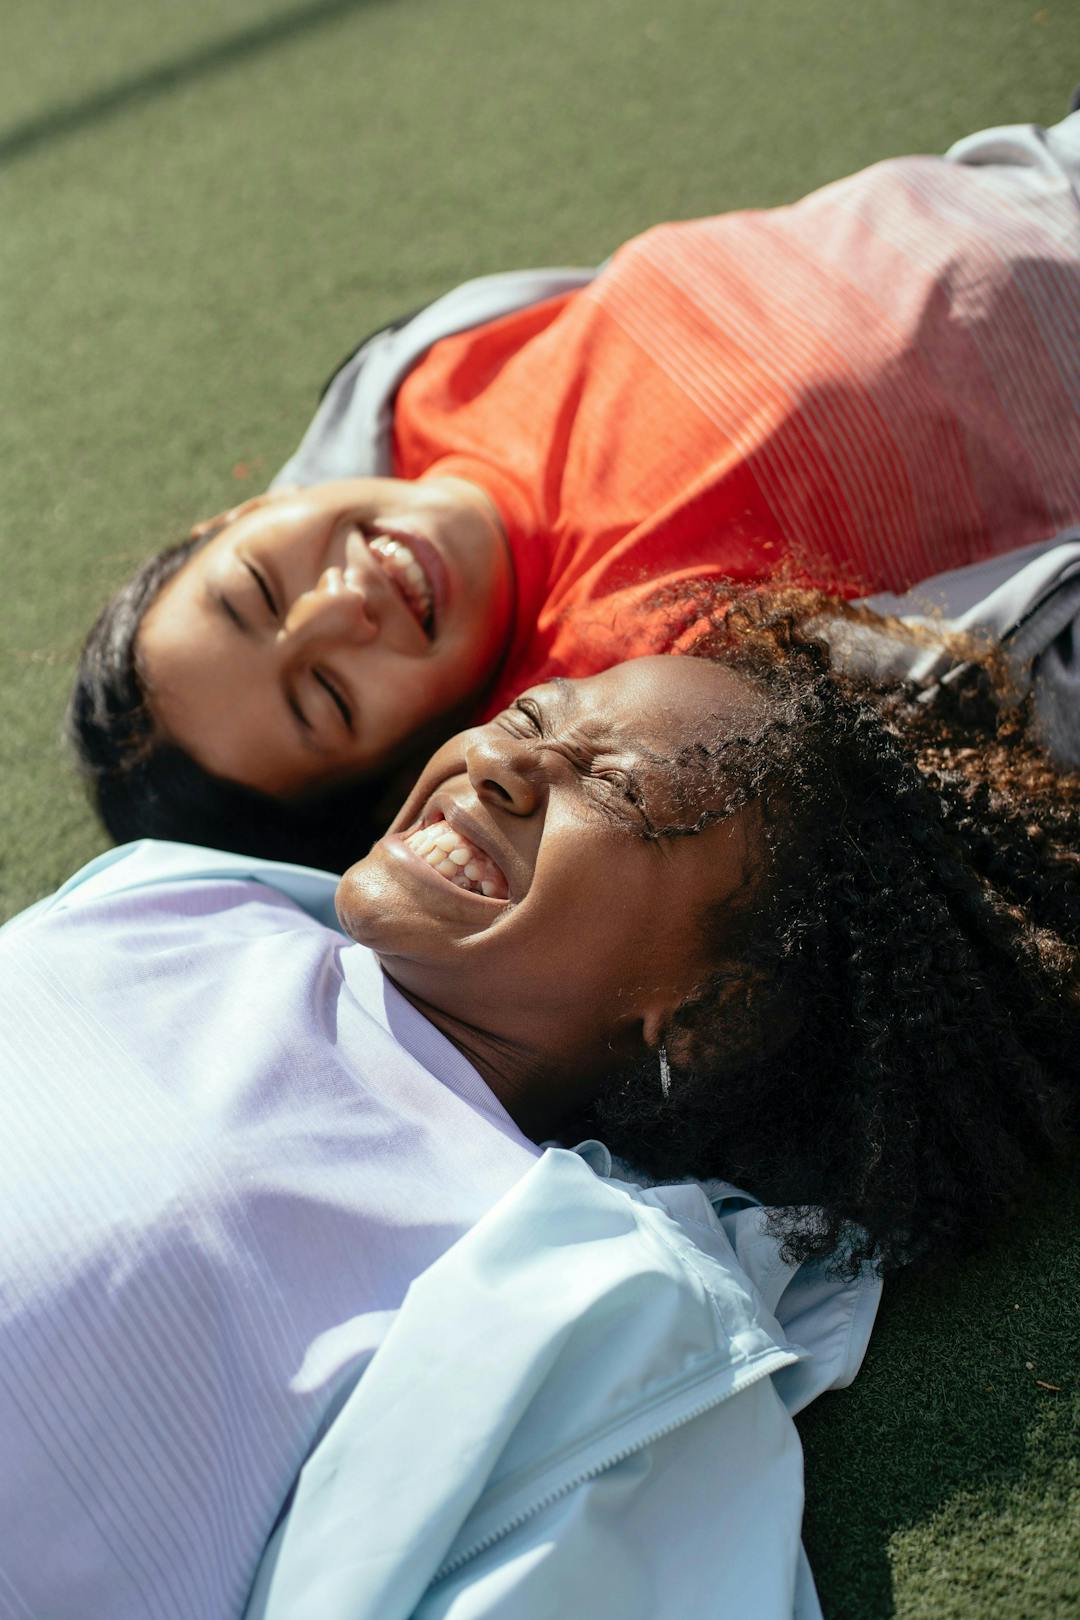 Two individuals are lying on a green outdoor surface, smiling and enjoying the sun while wearing light-colored clothing.